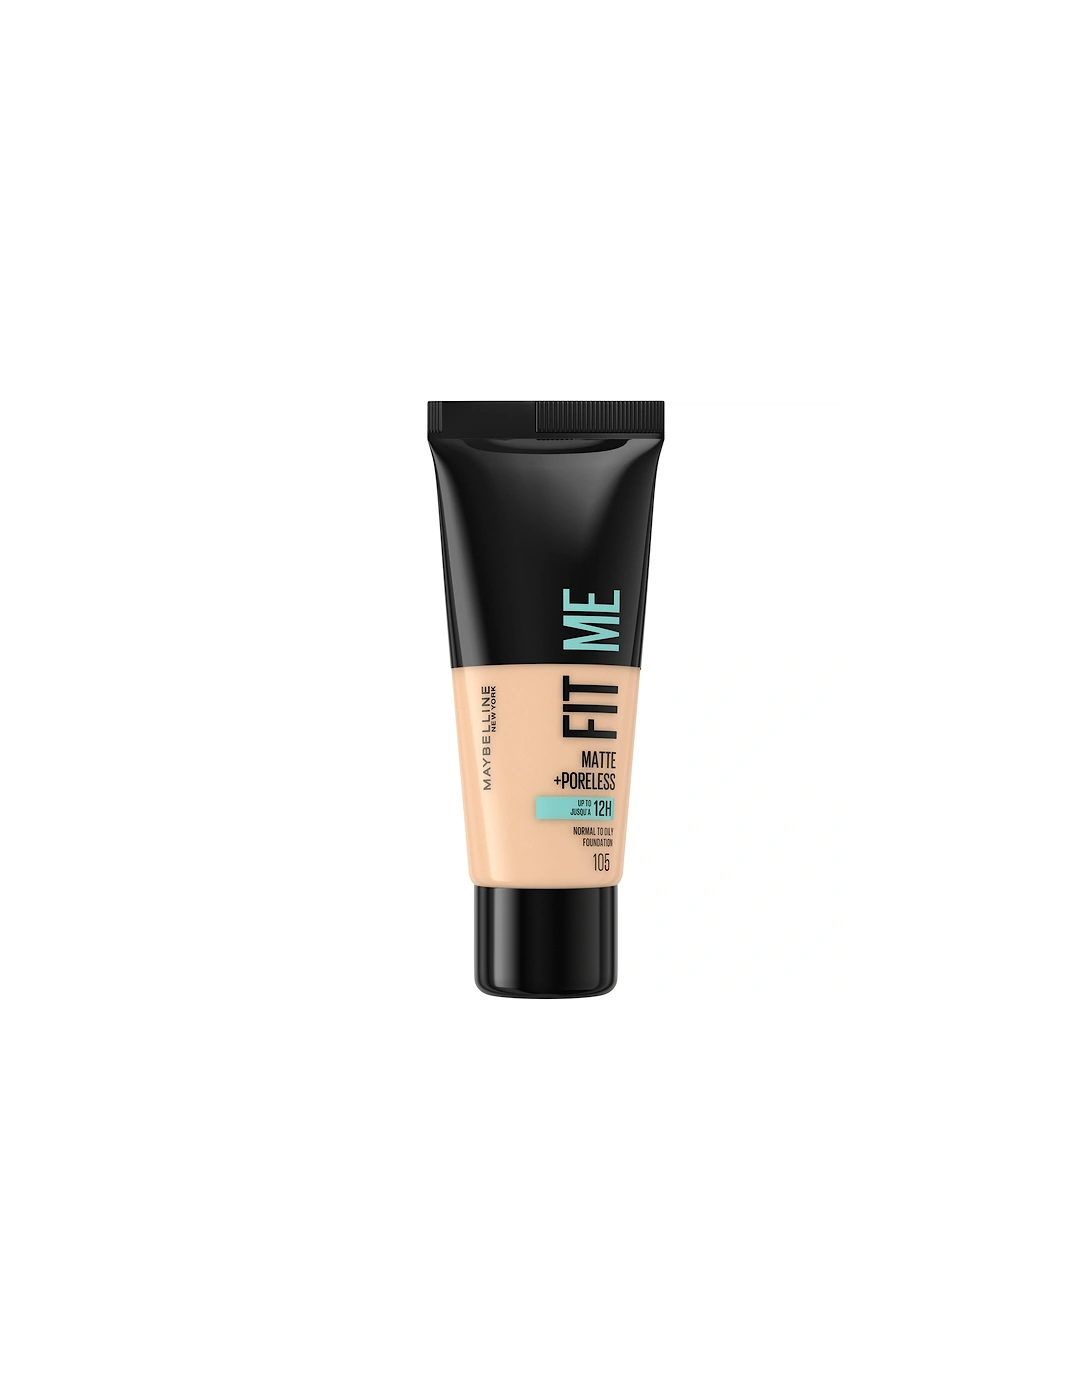 Fit Me! Matte and Poreless Foundation - 105 Natural Ivory - - Fit Me! Matte and Poreless Foundation 30ml (Various Shades) - Foundation - Fit Me! Matte and Poreless Foundation 30ml (Various Shades) - Tina - Fit Me! Matte and Poreless Foundation 30ml (Various Shades) - Jo, 2 of 1